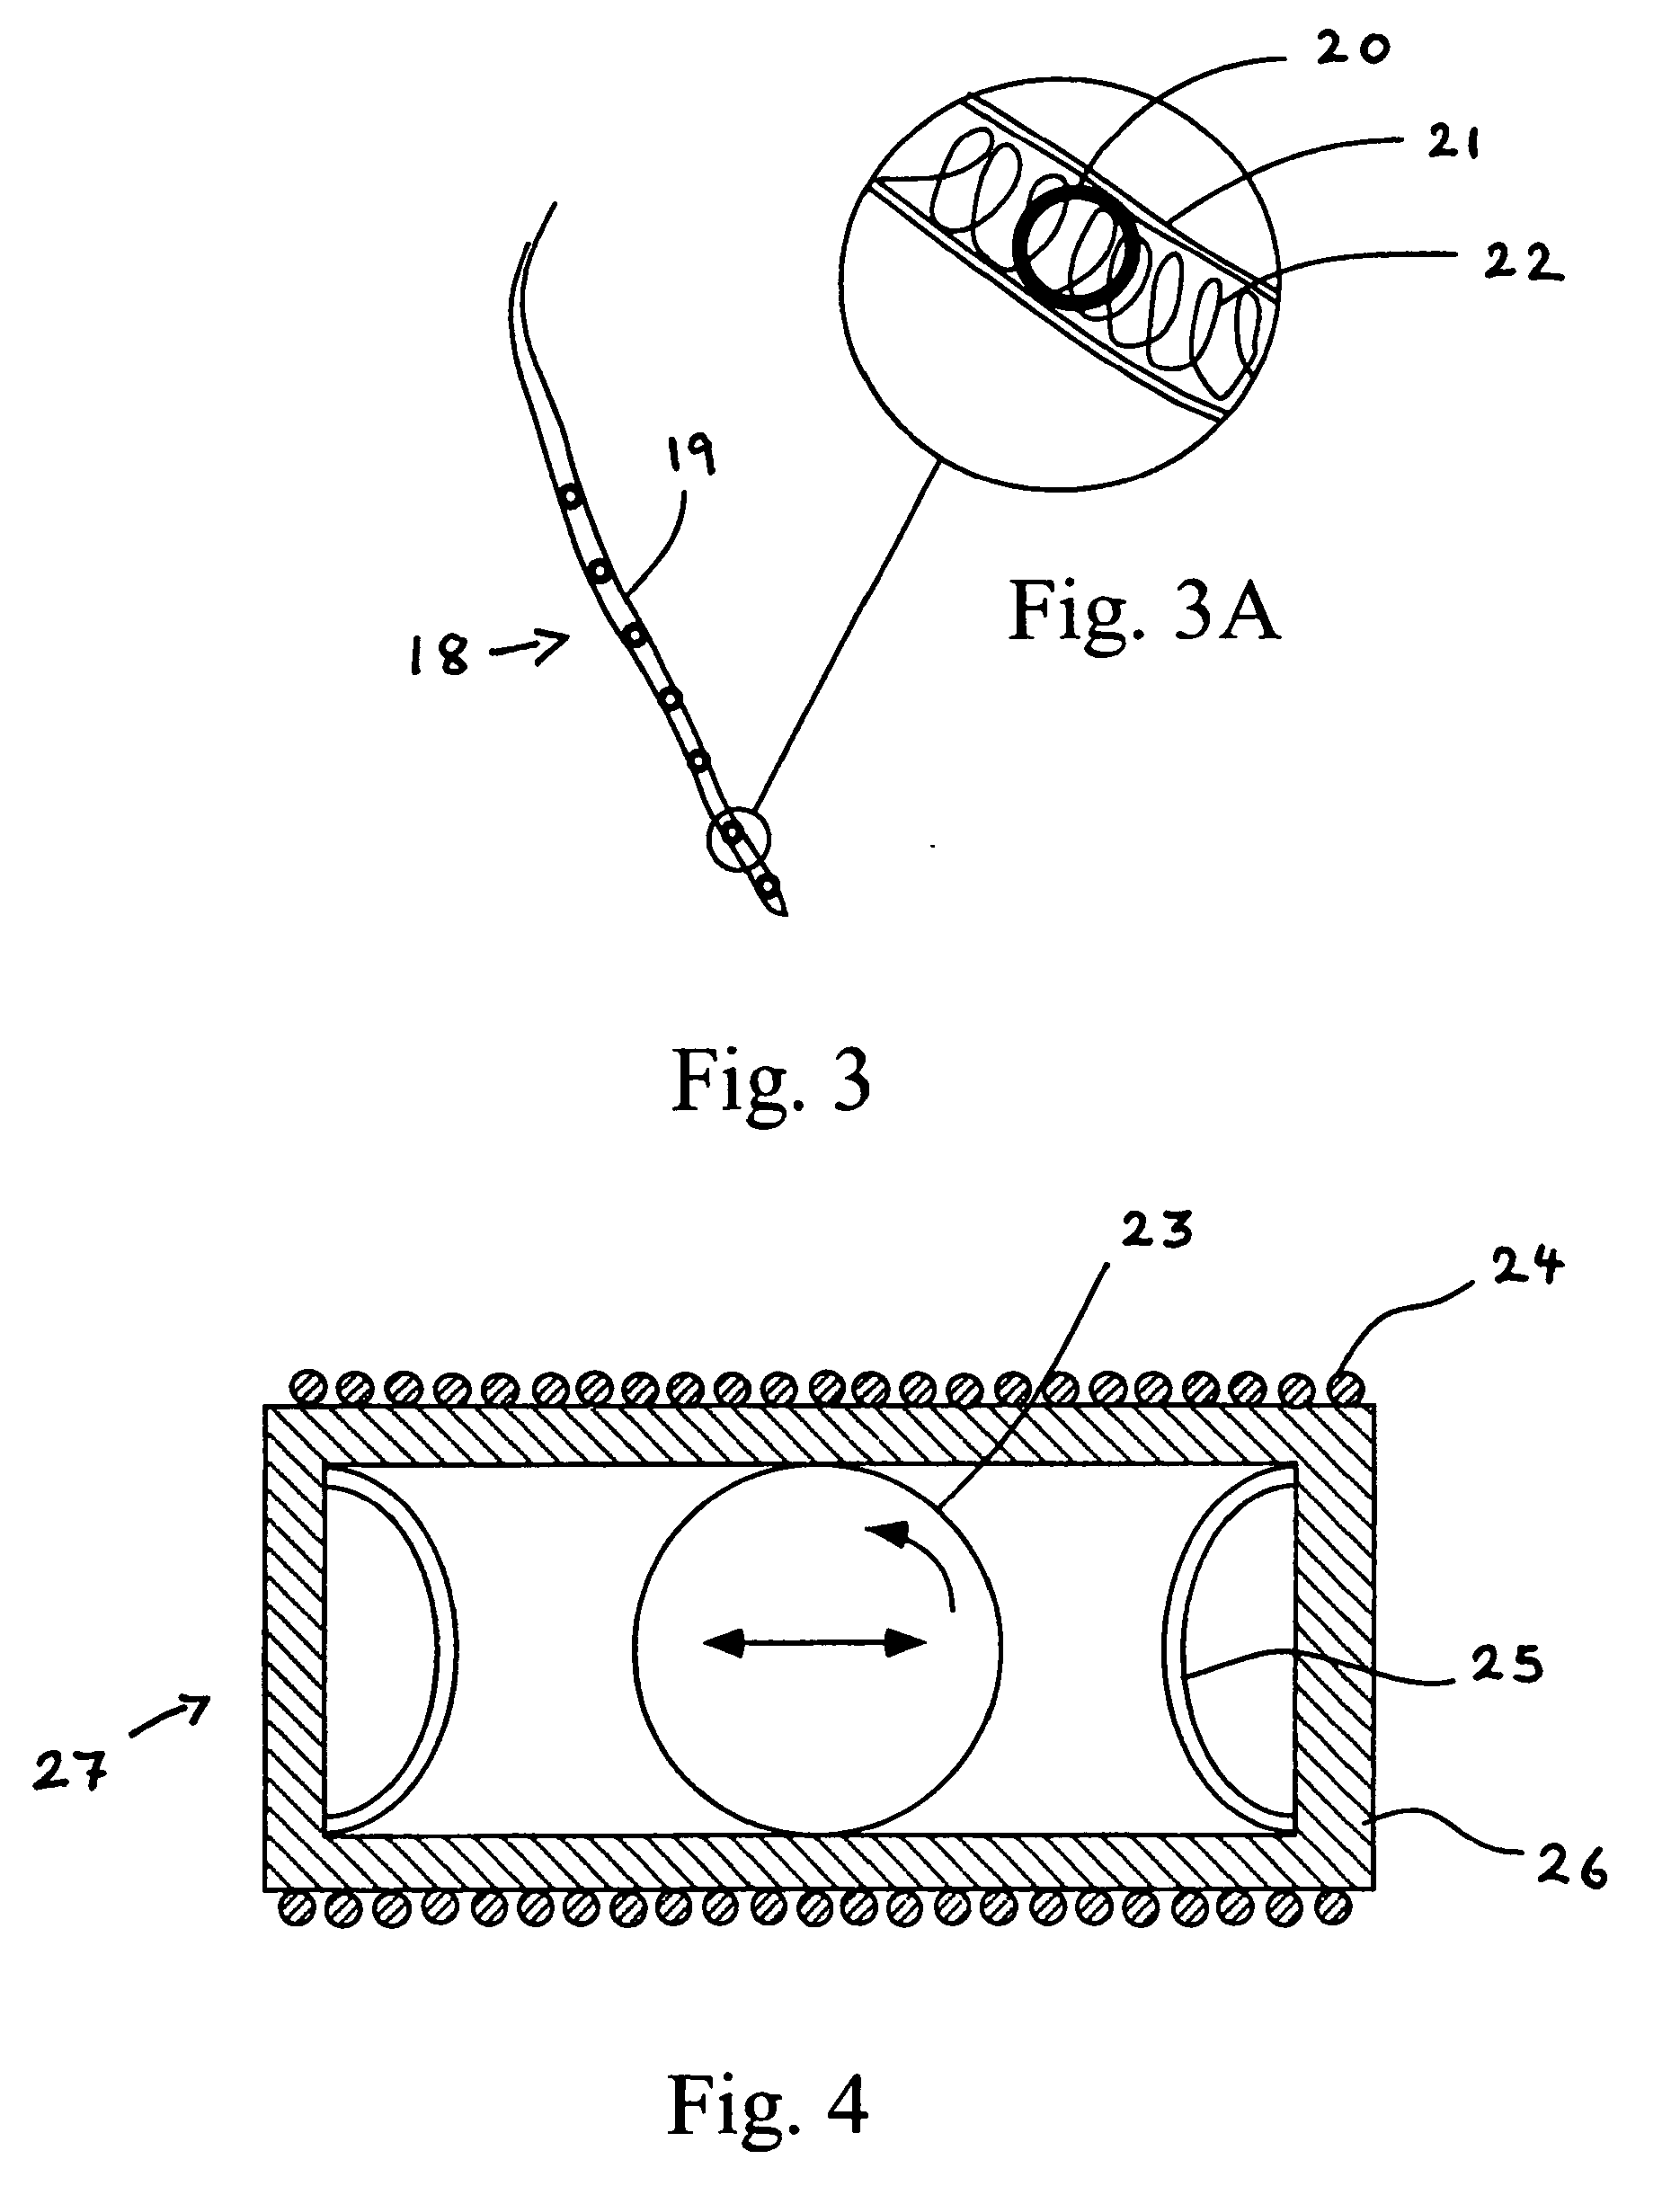 Energy generating systems for implanted medical devices